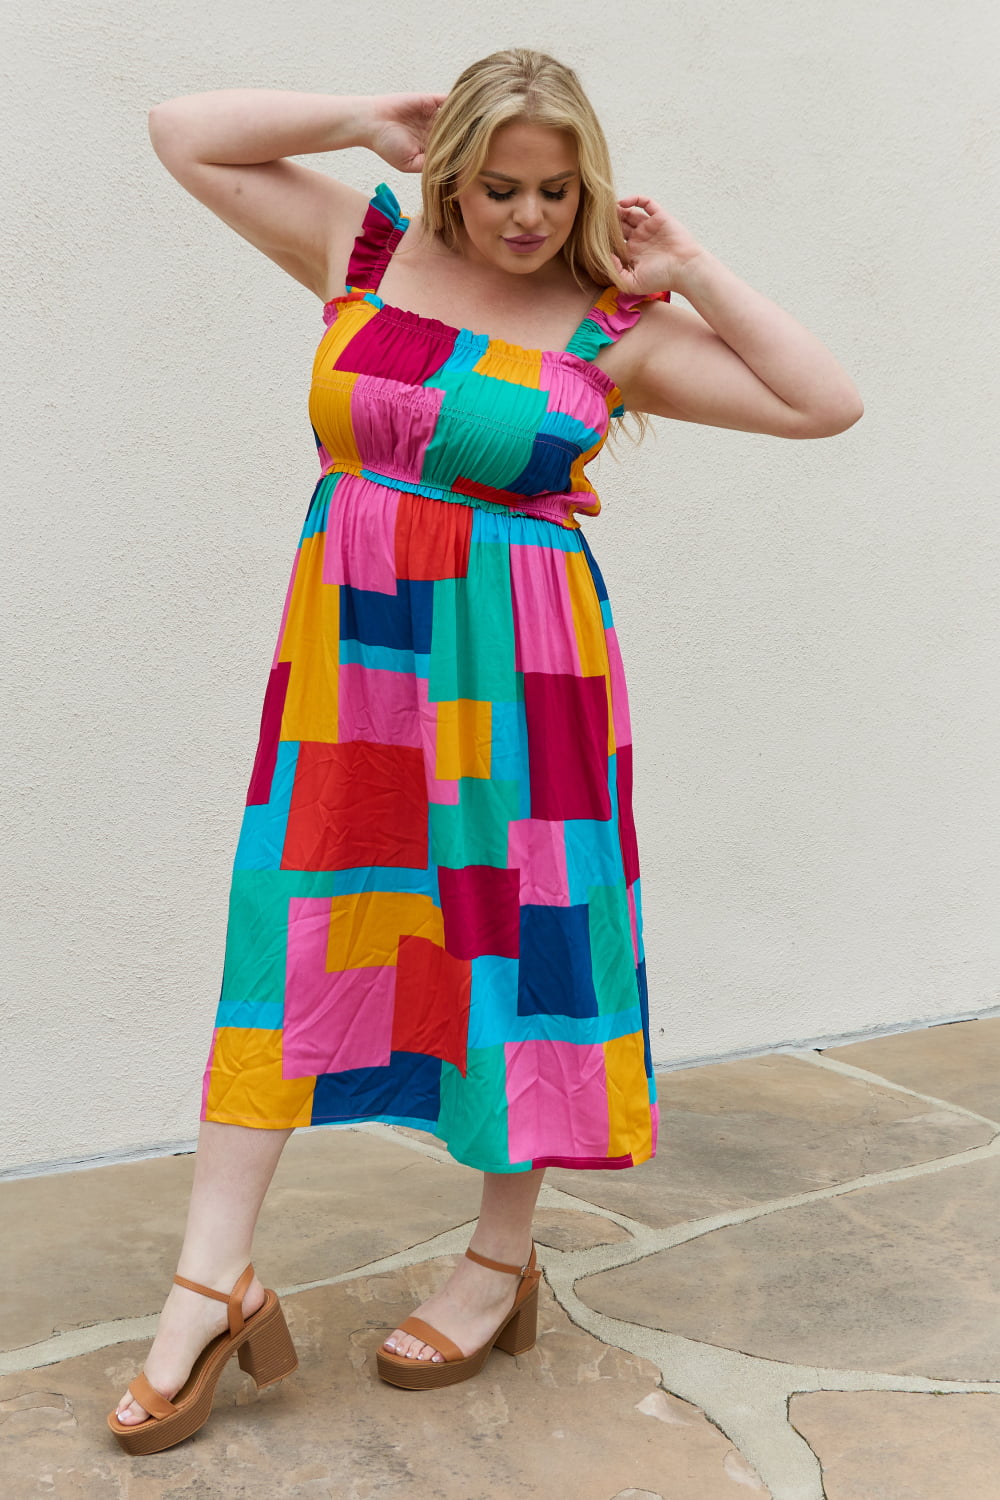 Multicolored Square Print Summer Dress up to 3XL - Shell Design Boutique